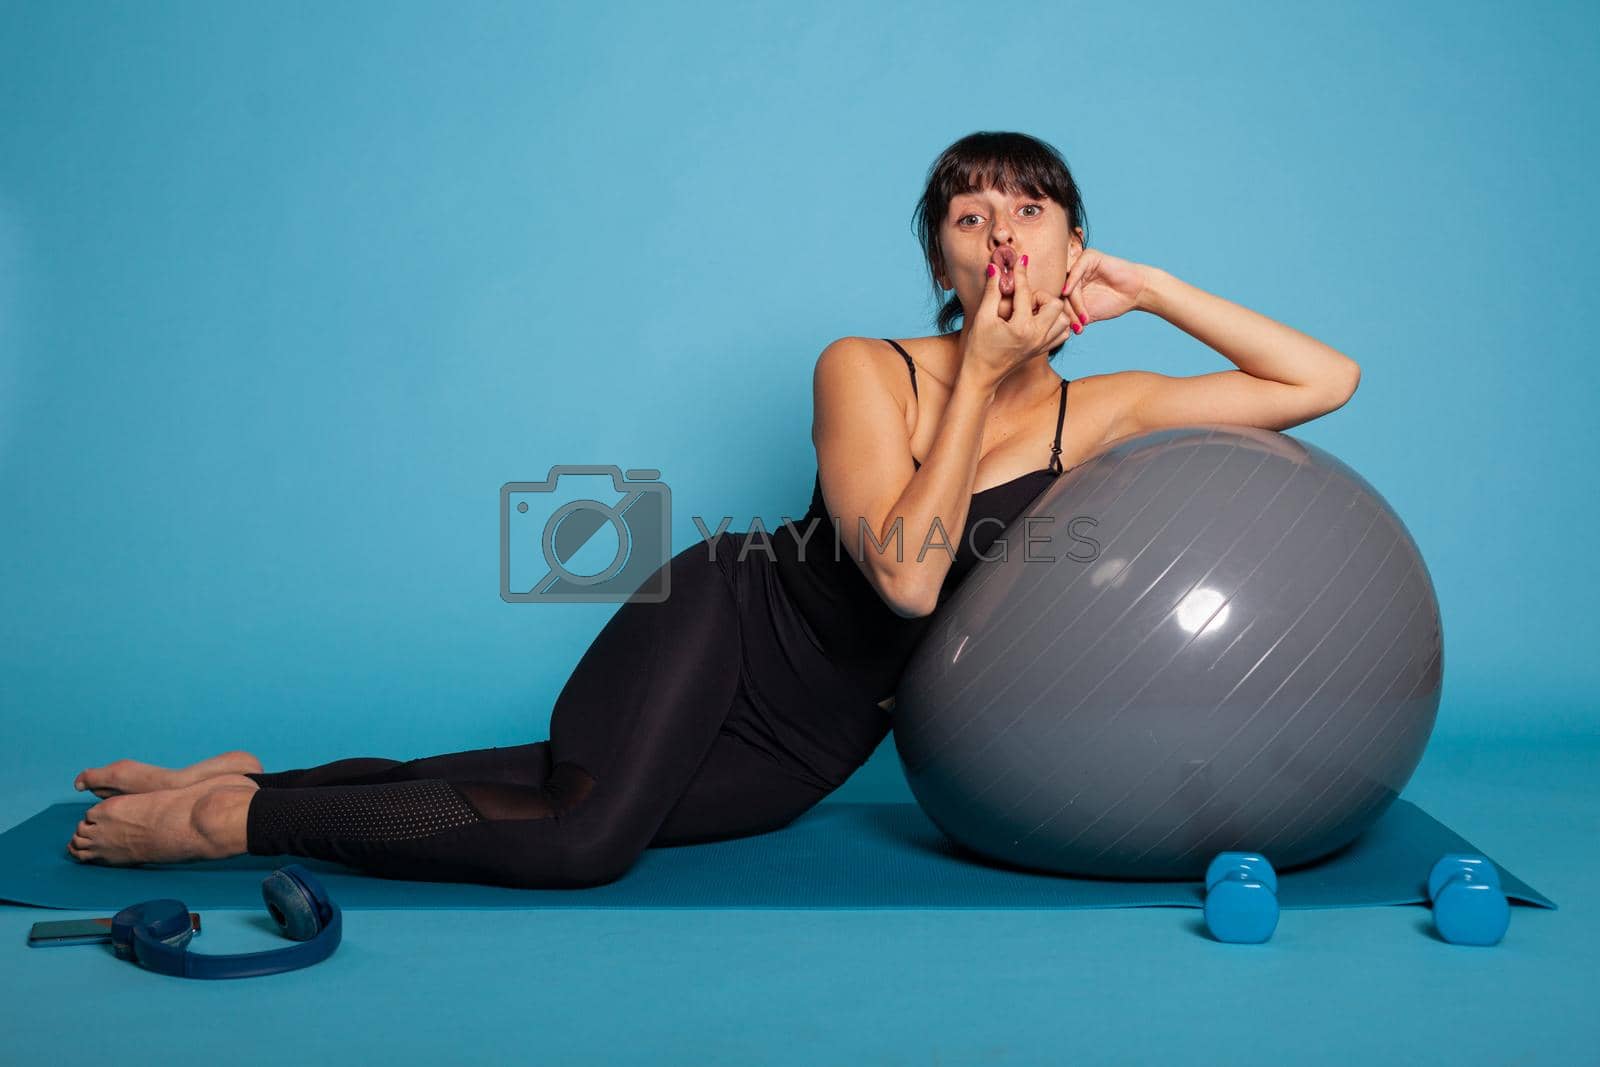 Personal trainer sitting on yoga mat leaning on fitness fitball making funny expression during fitness workout. Active fit woman stretching body muscles working at healthy lifestyle in studio